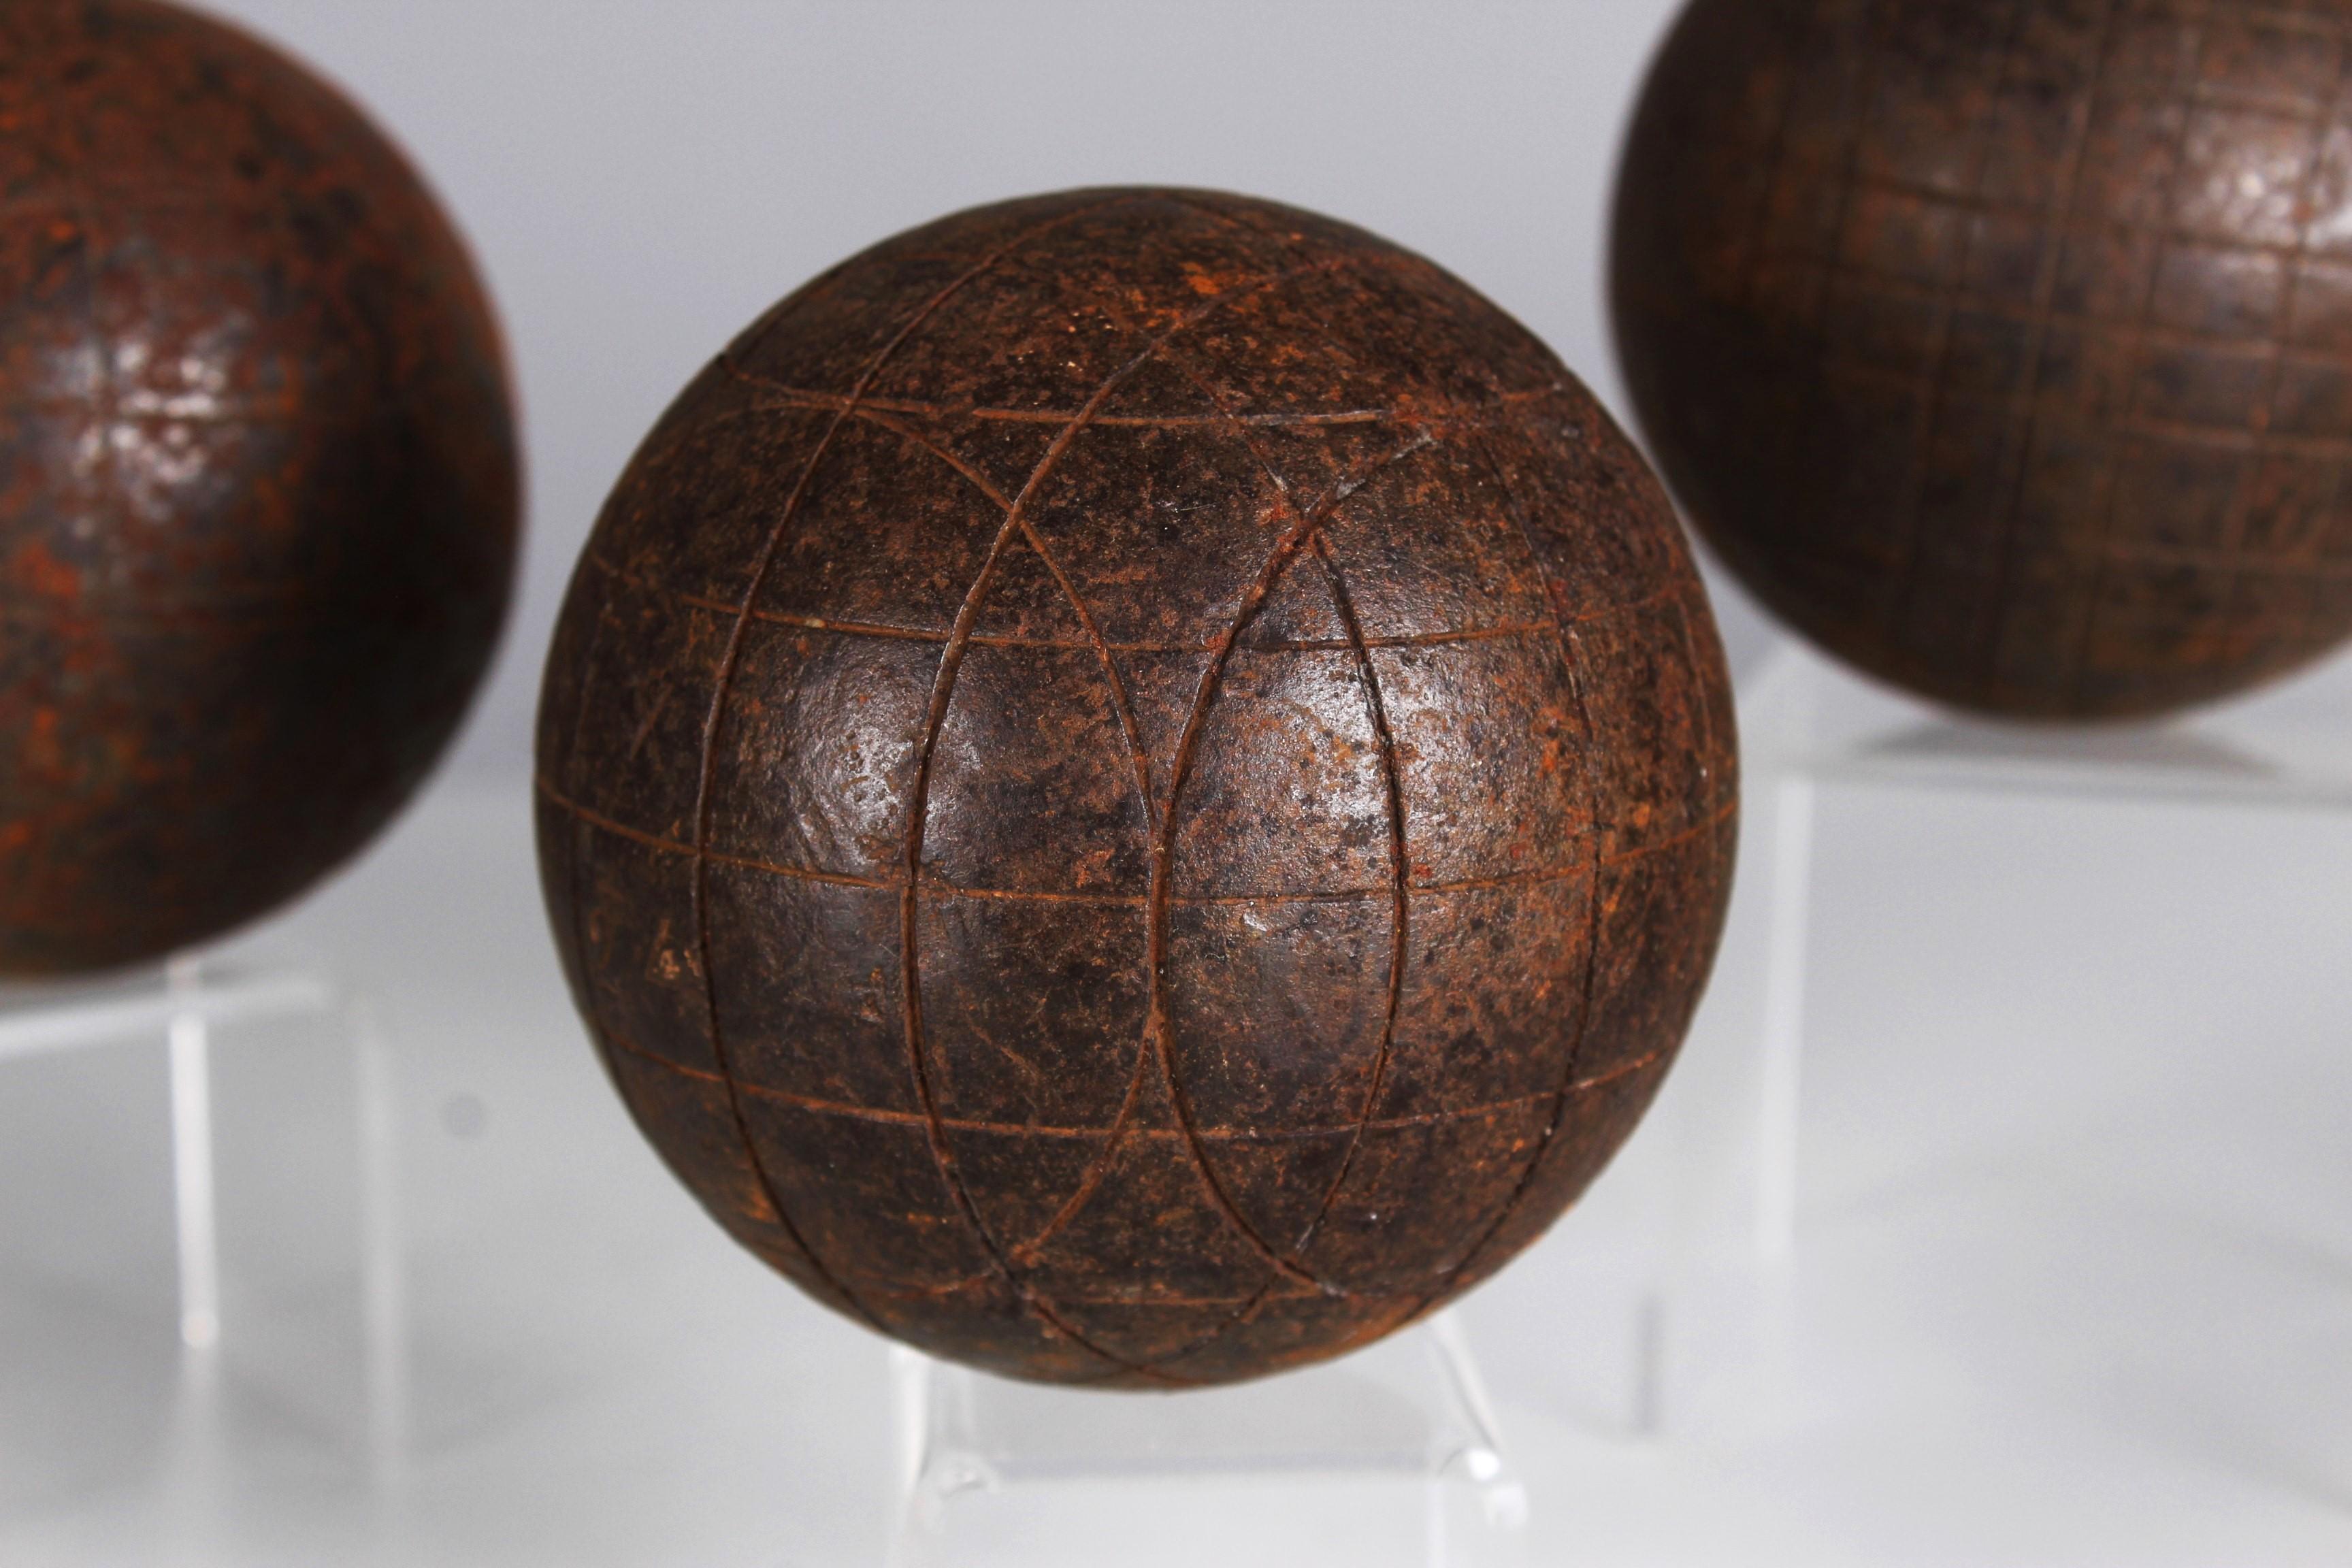 Beautiful, unique Boule set of three Boule balls, France, late 19th century.

In the 19th century, antique metal boules balls experienced a renaissance that took the game of boules to a new level. 
These ornately crafted balls were not only